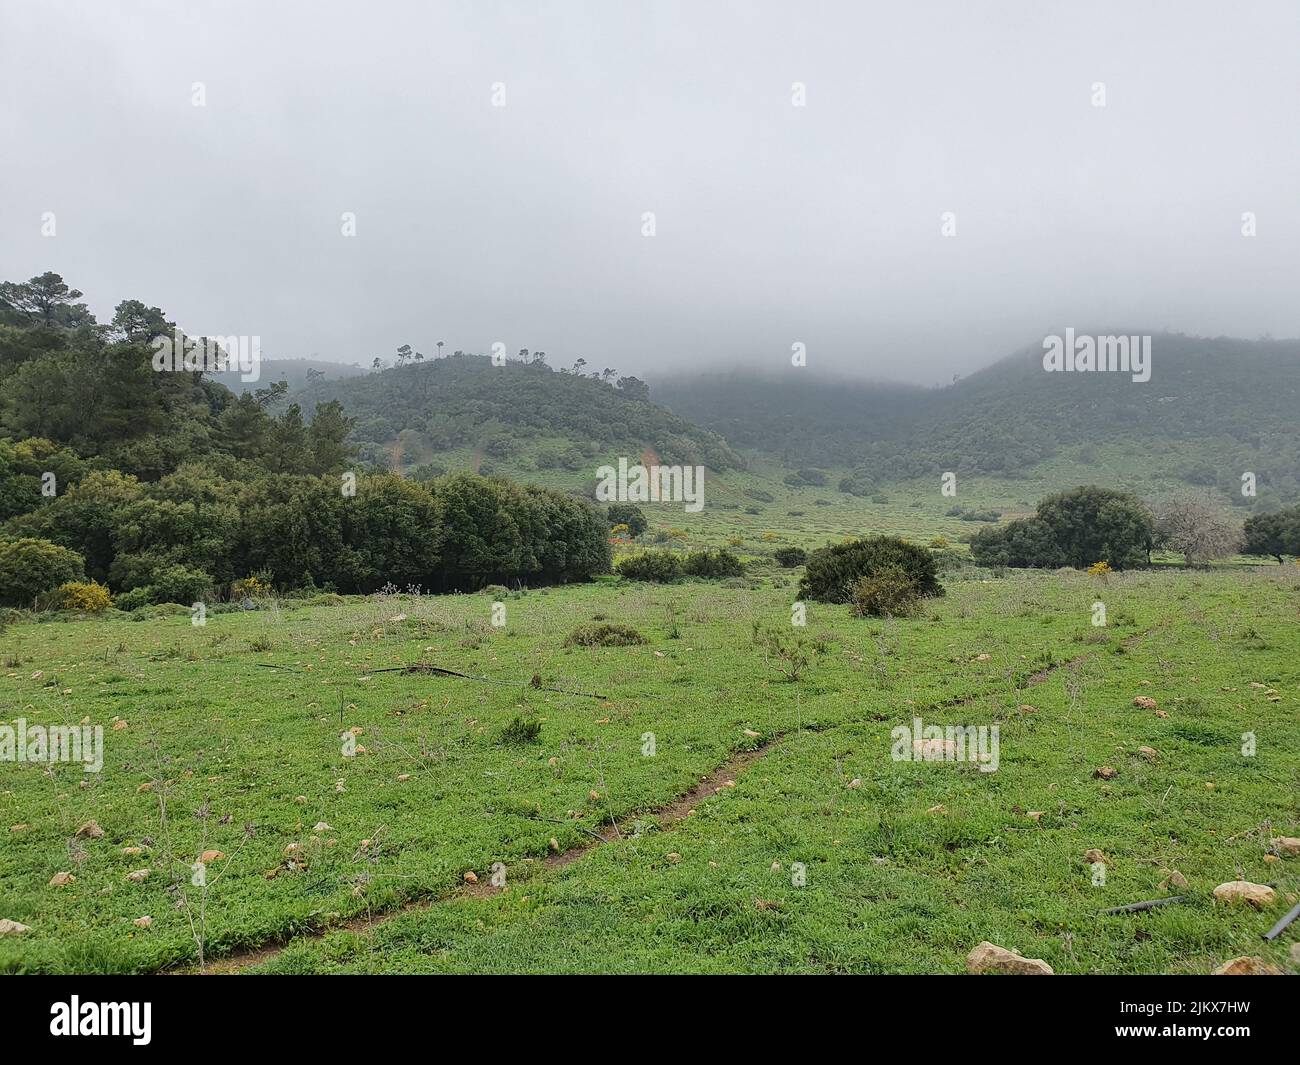 A beautiful view of nature on a misty day Stock Photo